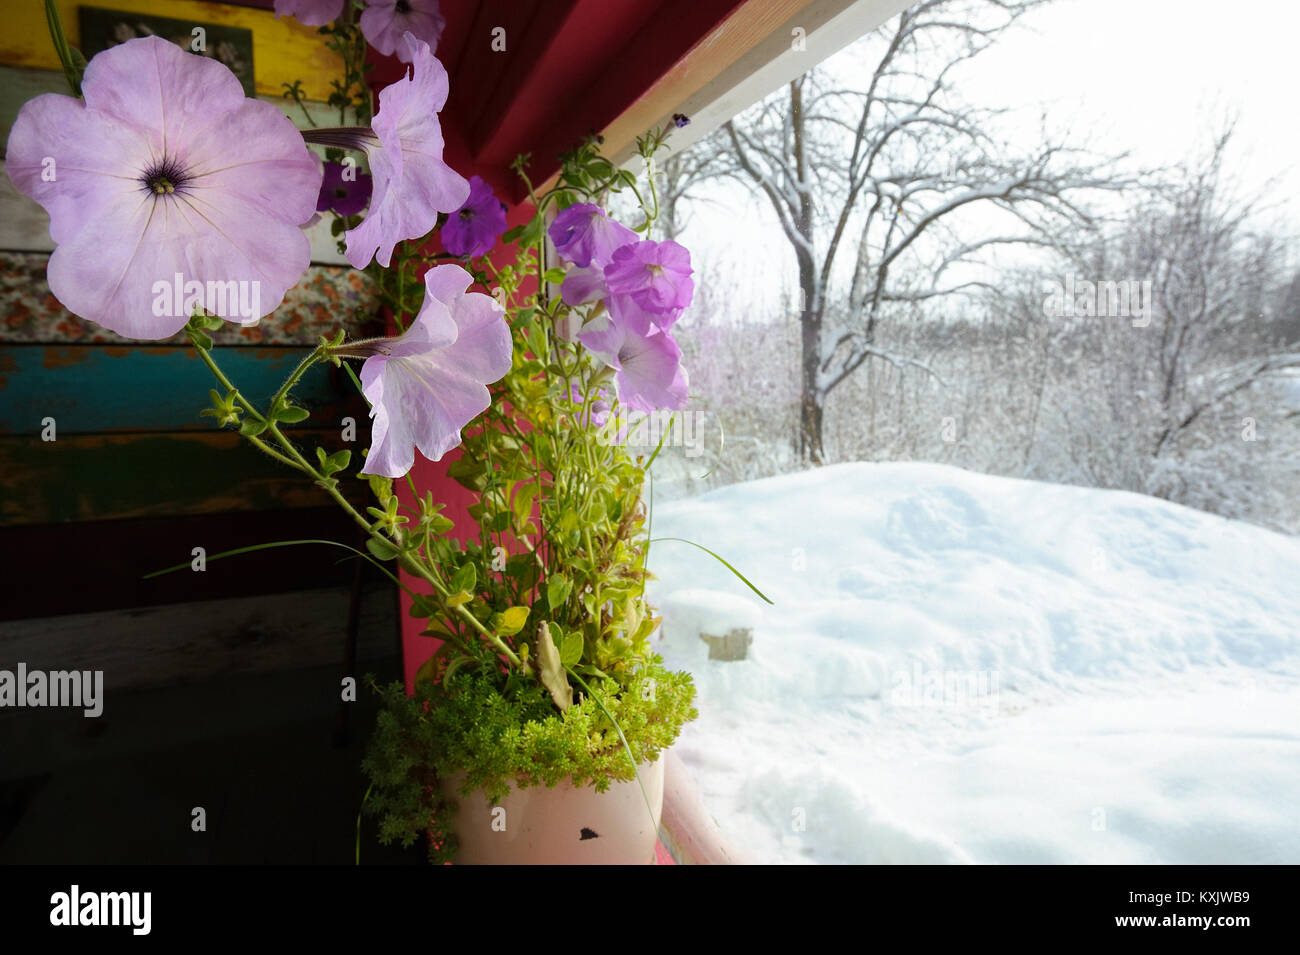 A window with flowers in winter time Stock Photo